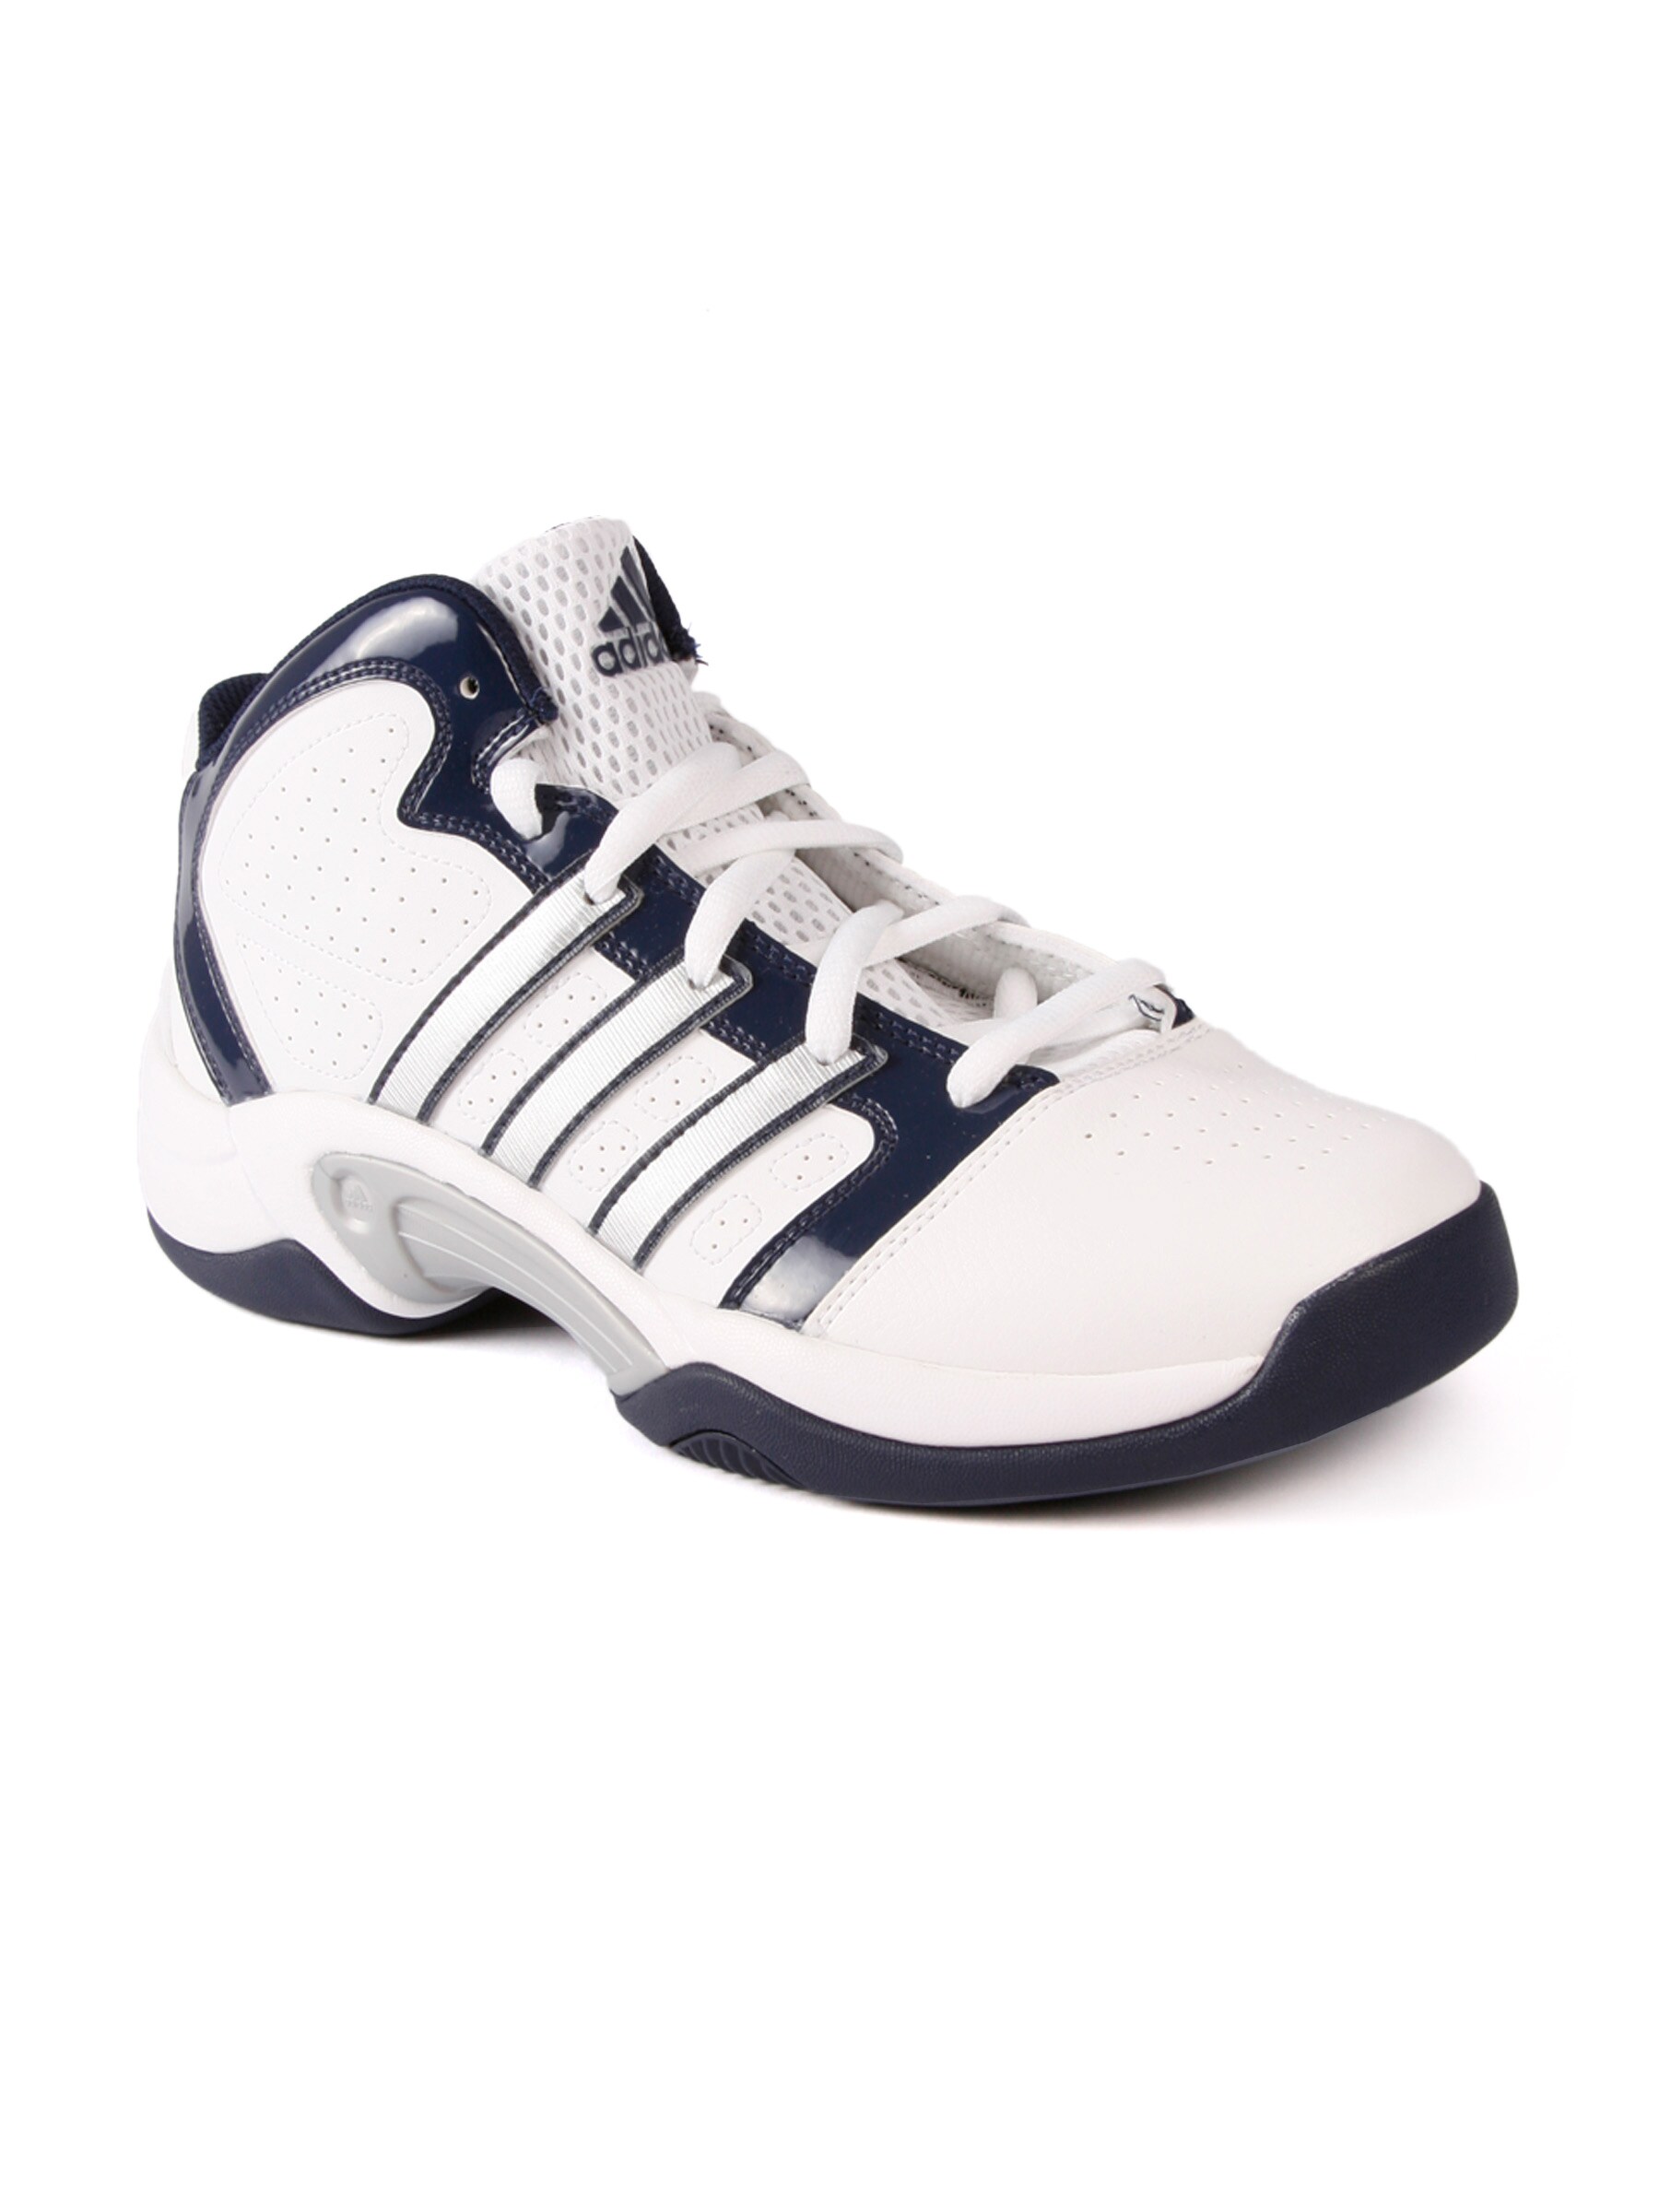 ADIDAS Men Tip Off 2 White Sports Shoes